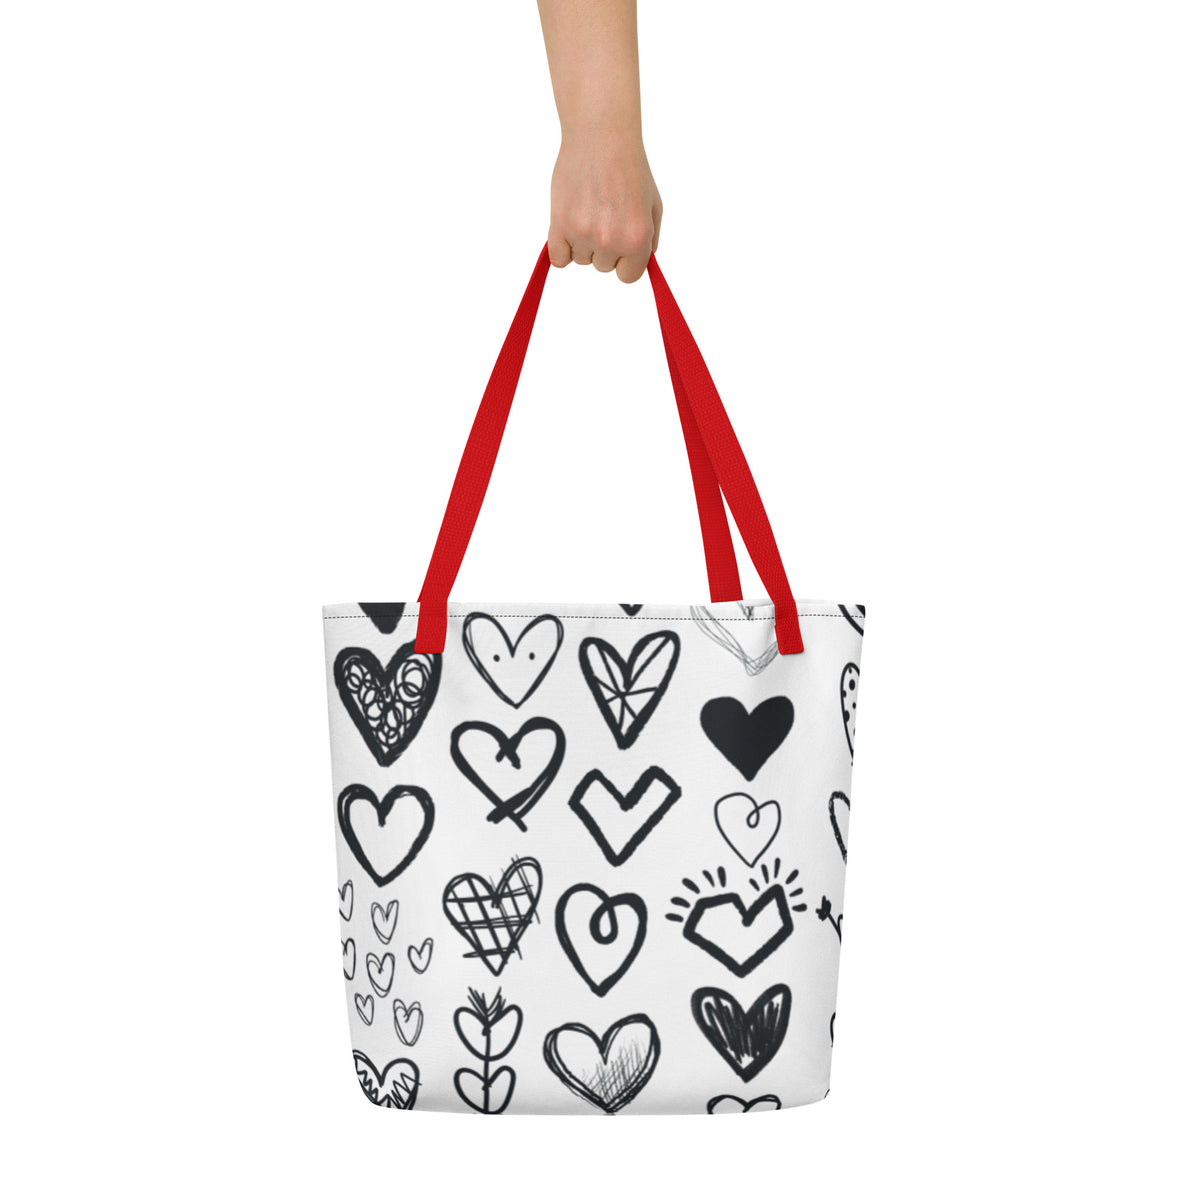 PENCIL HEARTS All-Over Print Large Tote Bag